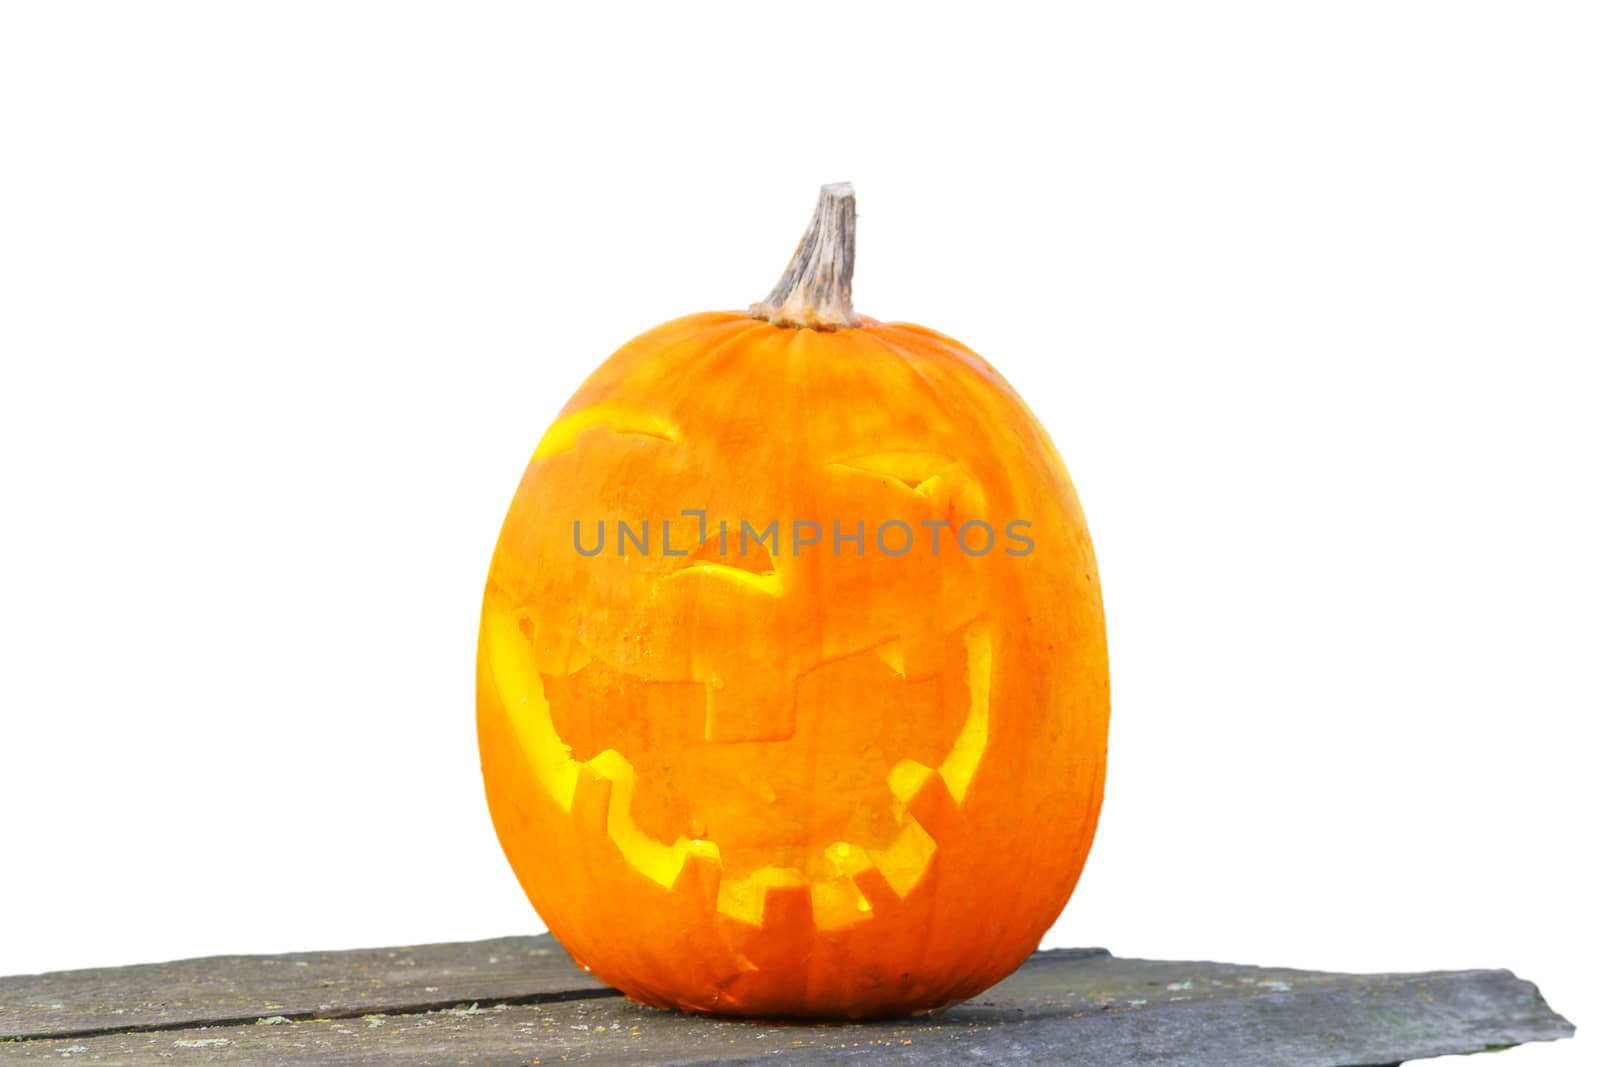 Decoration for Halloween the pumpkin head by JFsPic